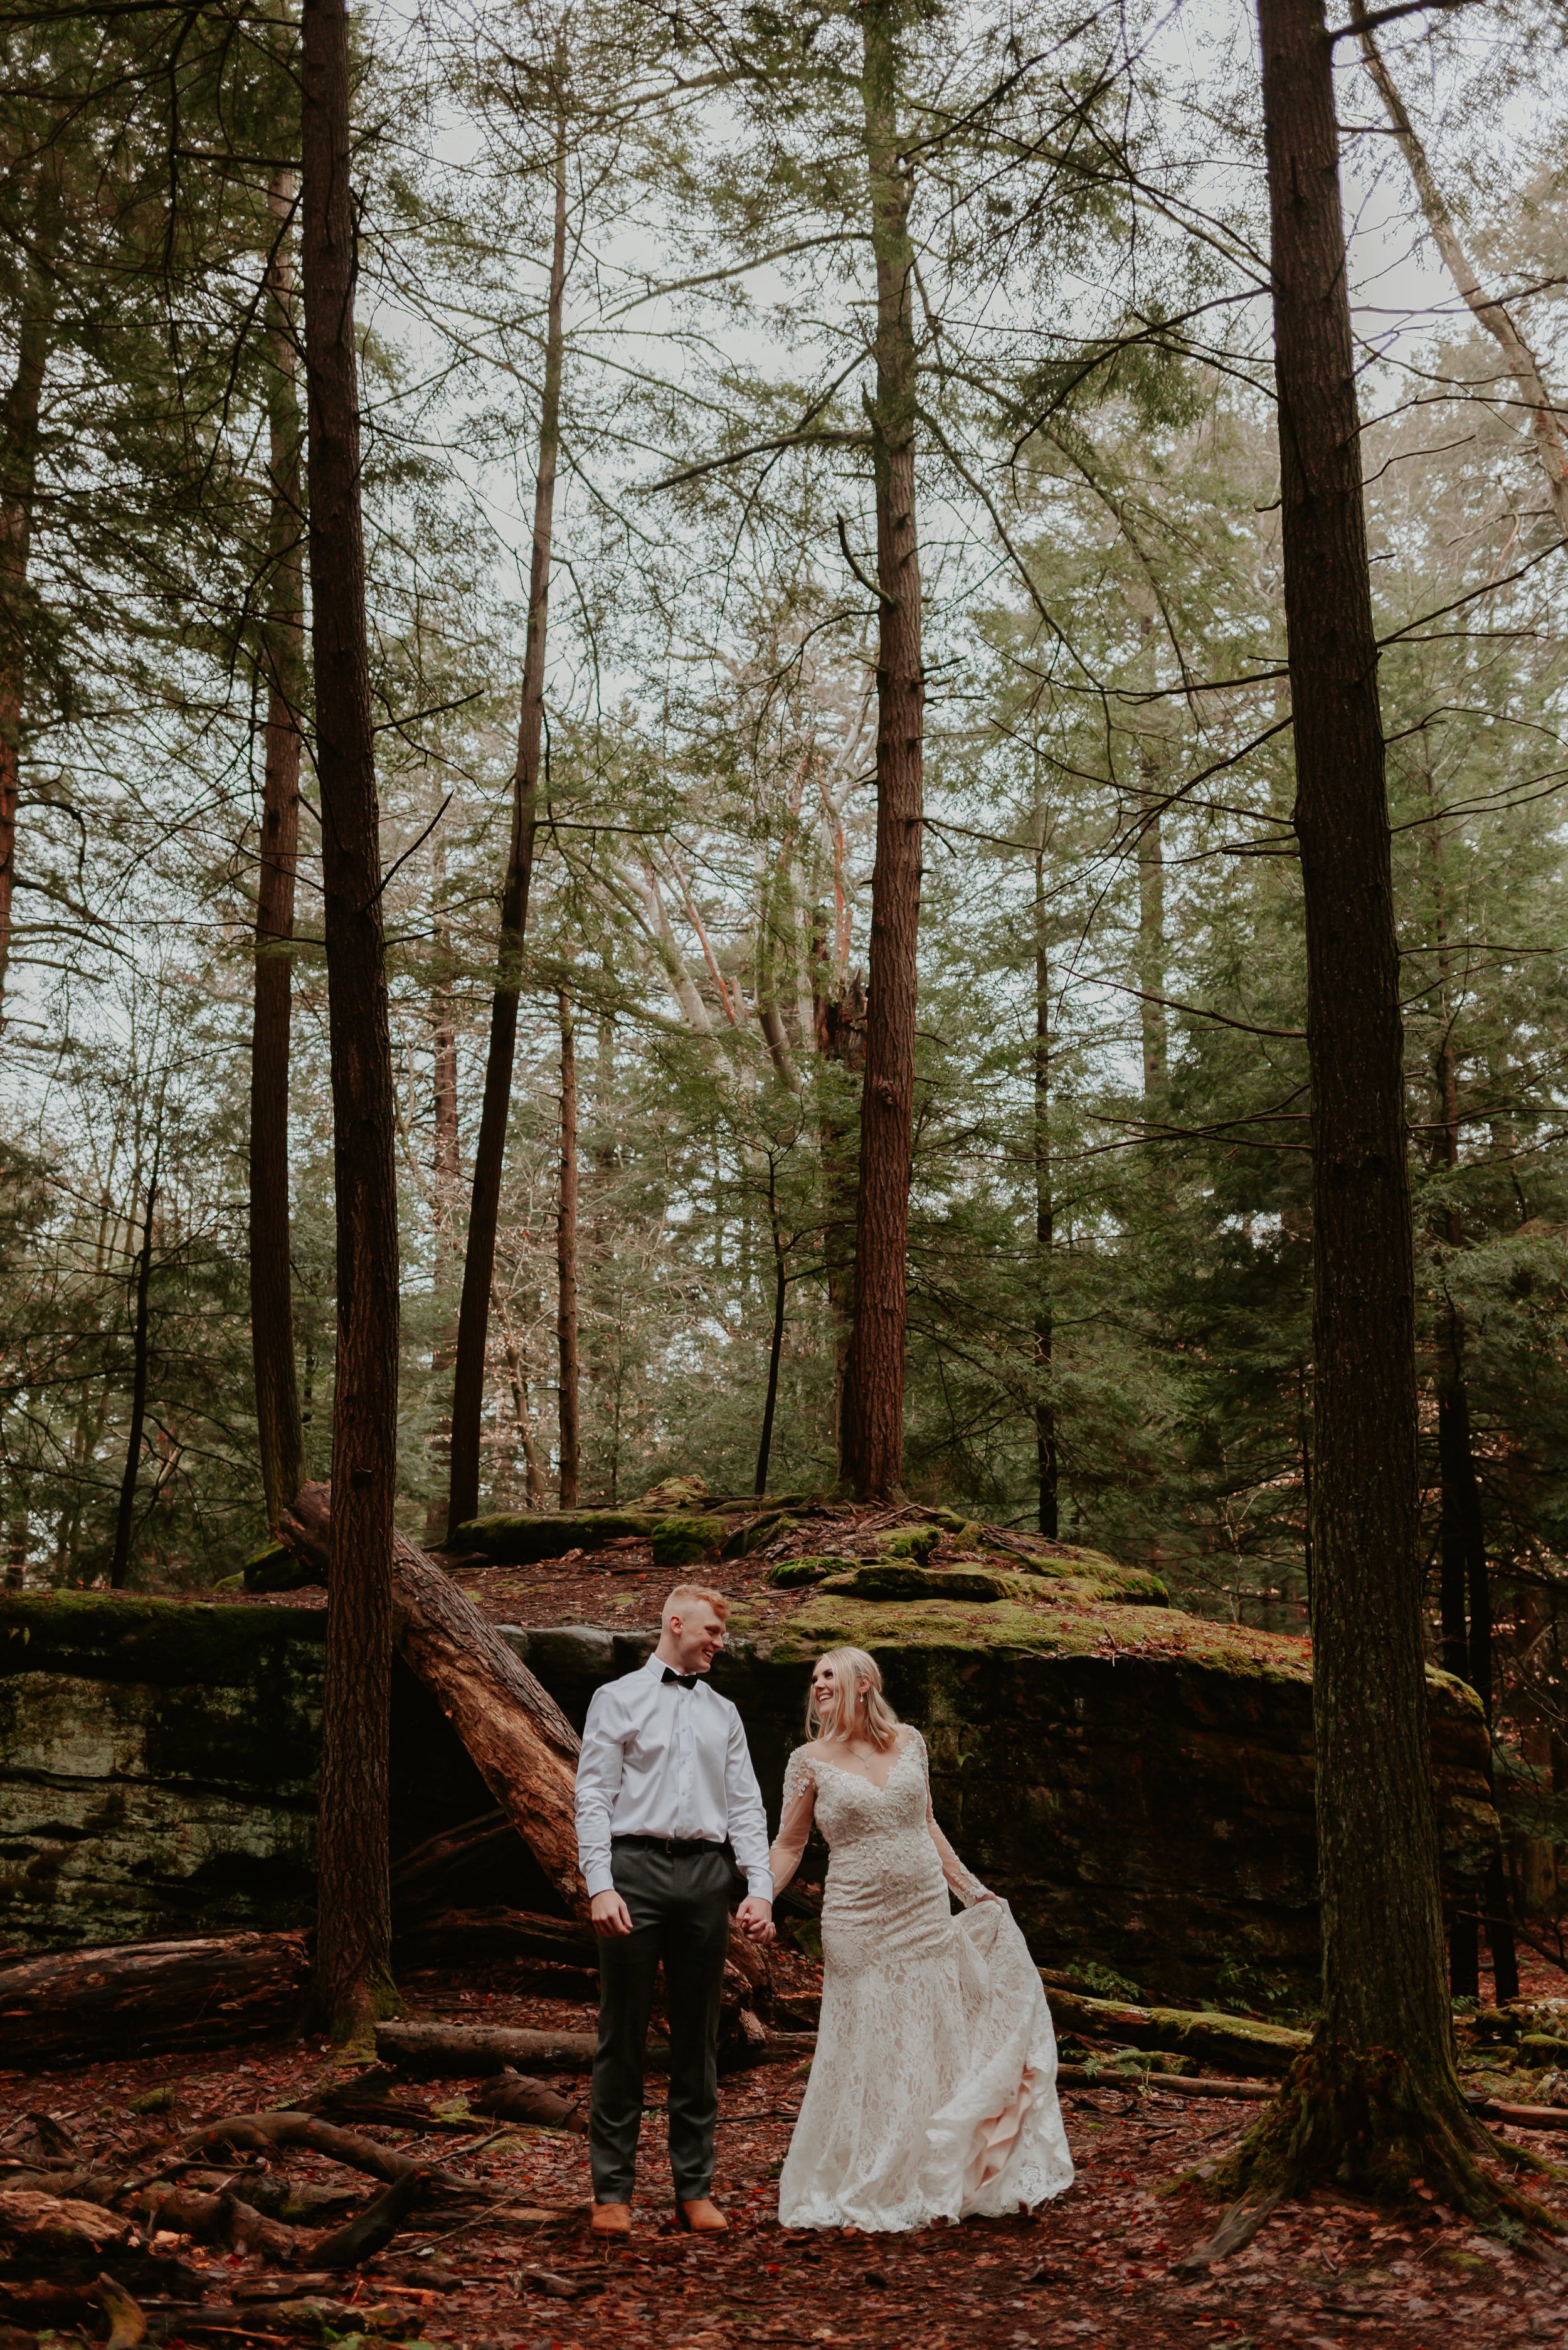 Groom holds bride's hand and looks at her while standing in front of large rock in the forest.